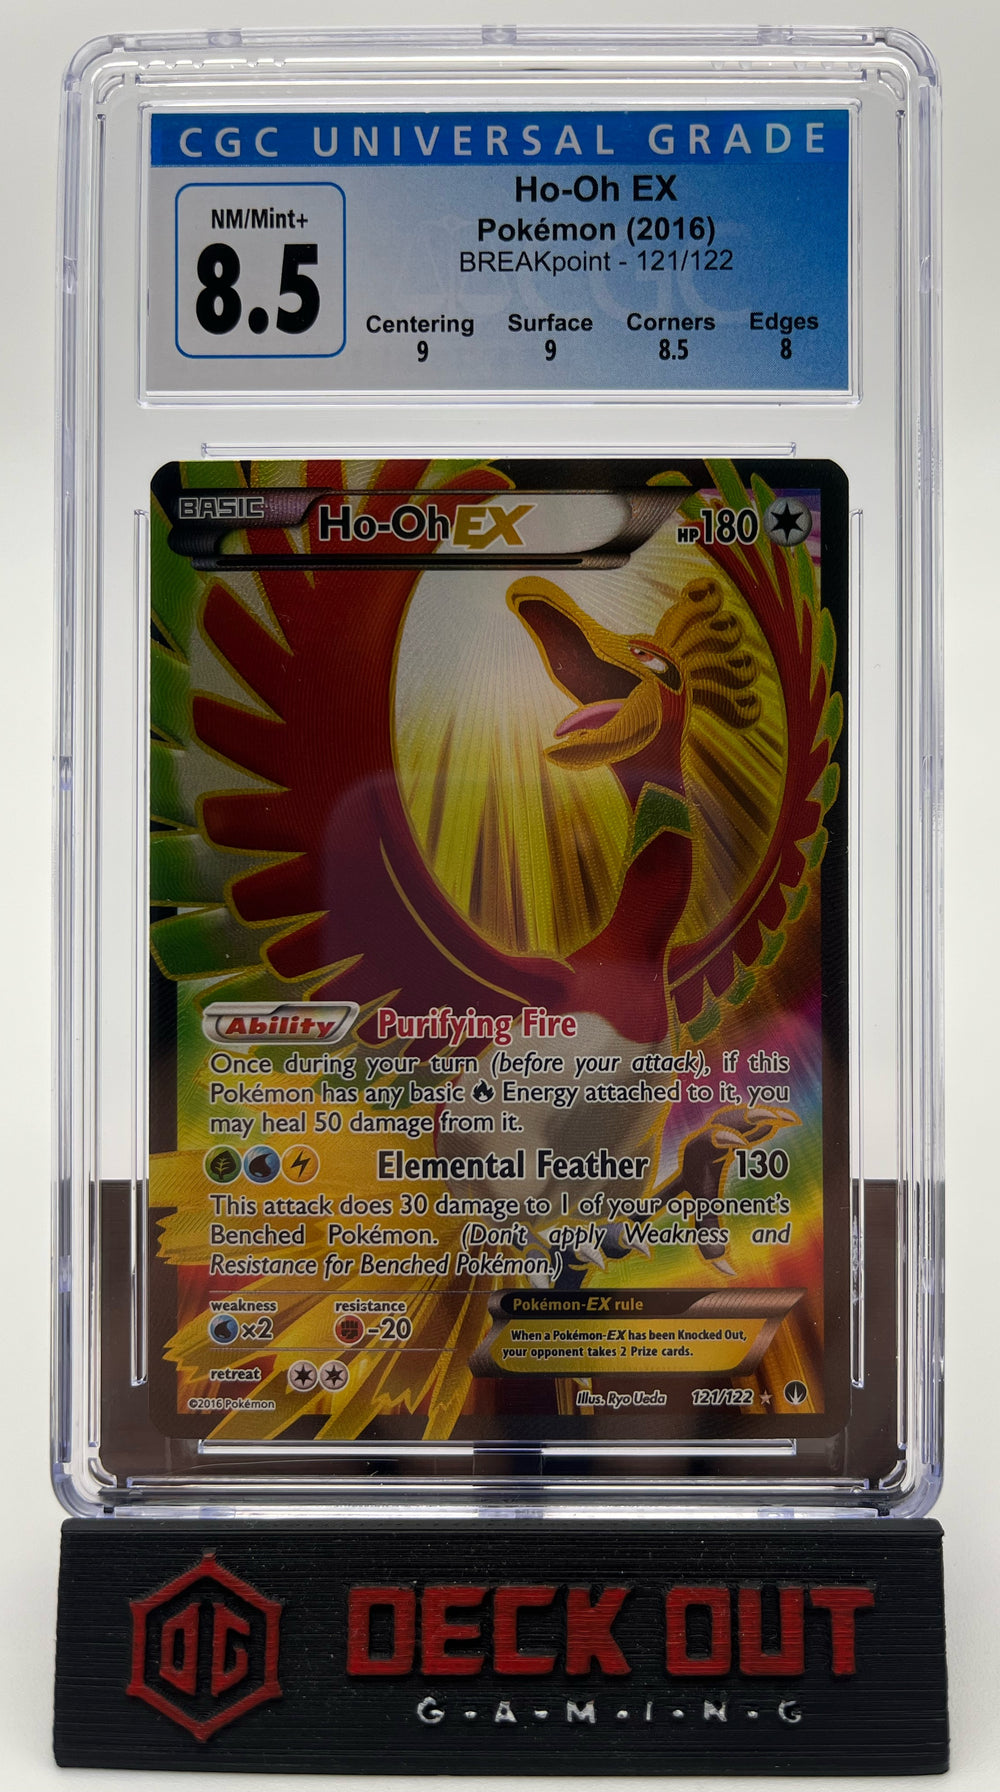 Ho-oh EX- Breakpoint- 121/122 - CGC 8.5 (9.0/9.0/8.5/8.0)